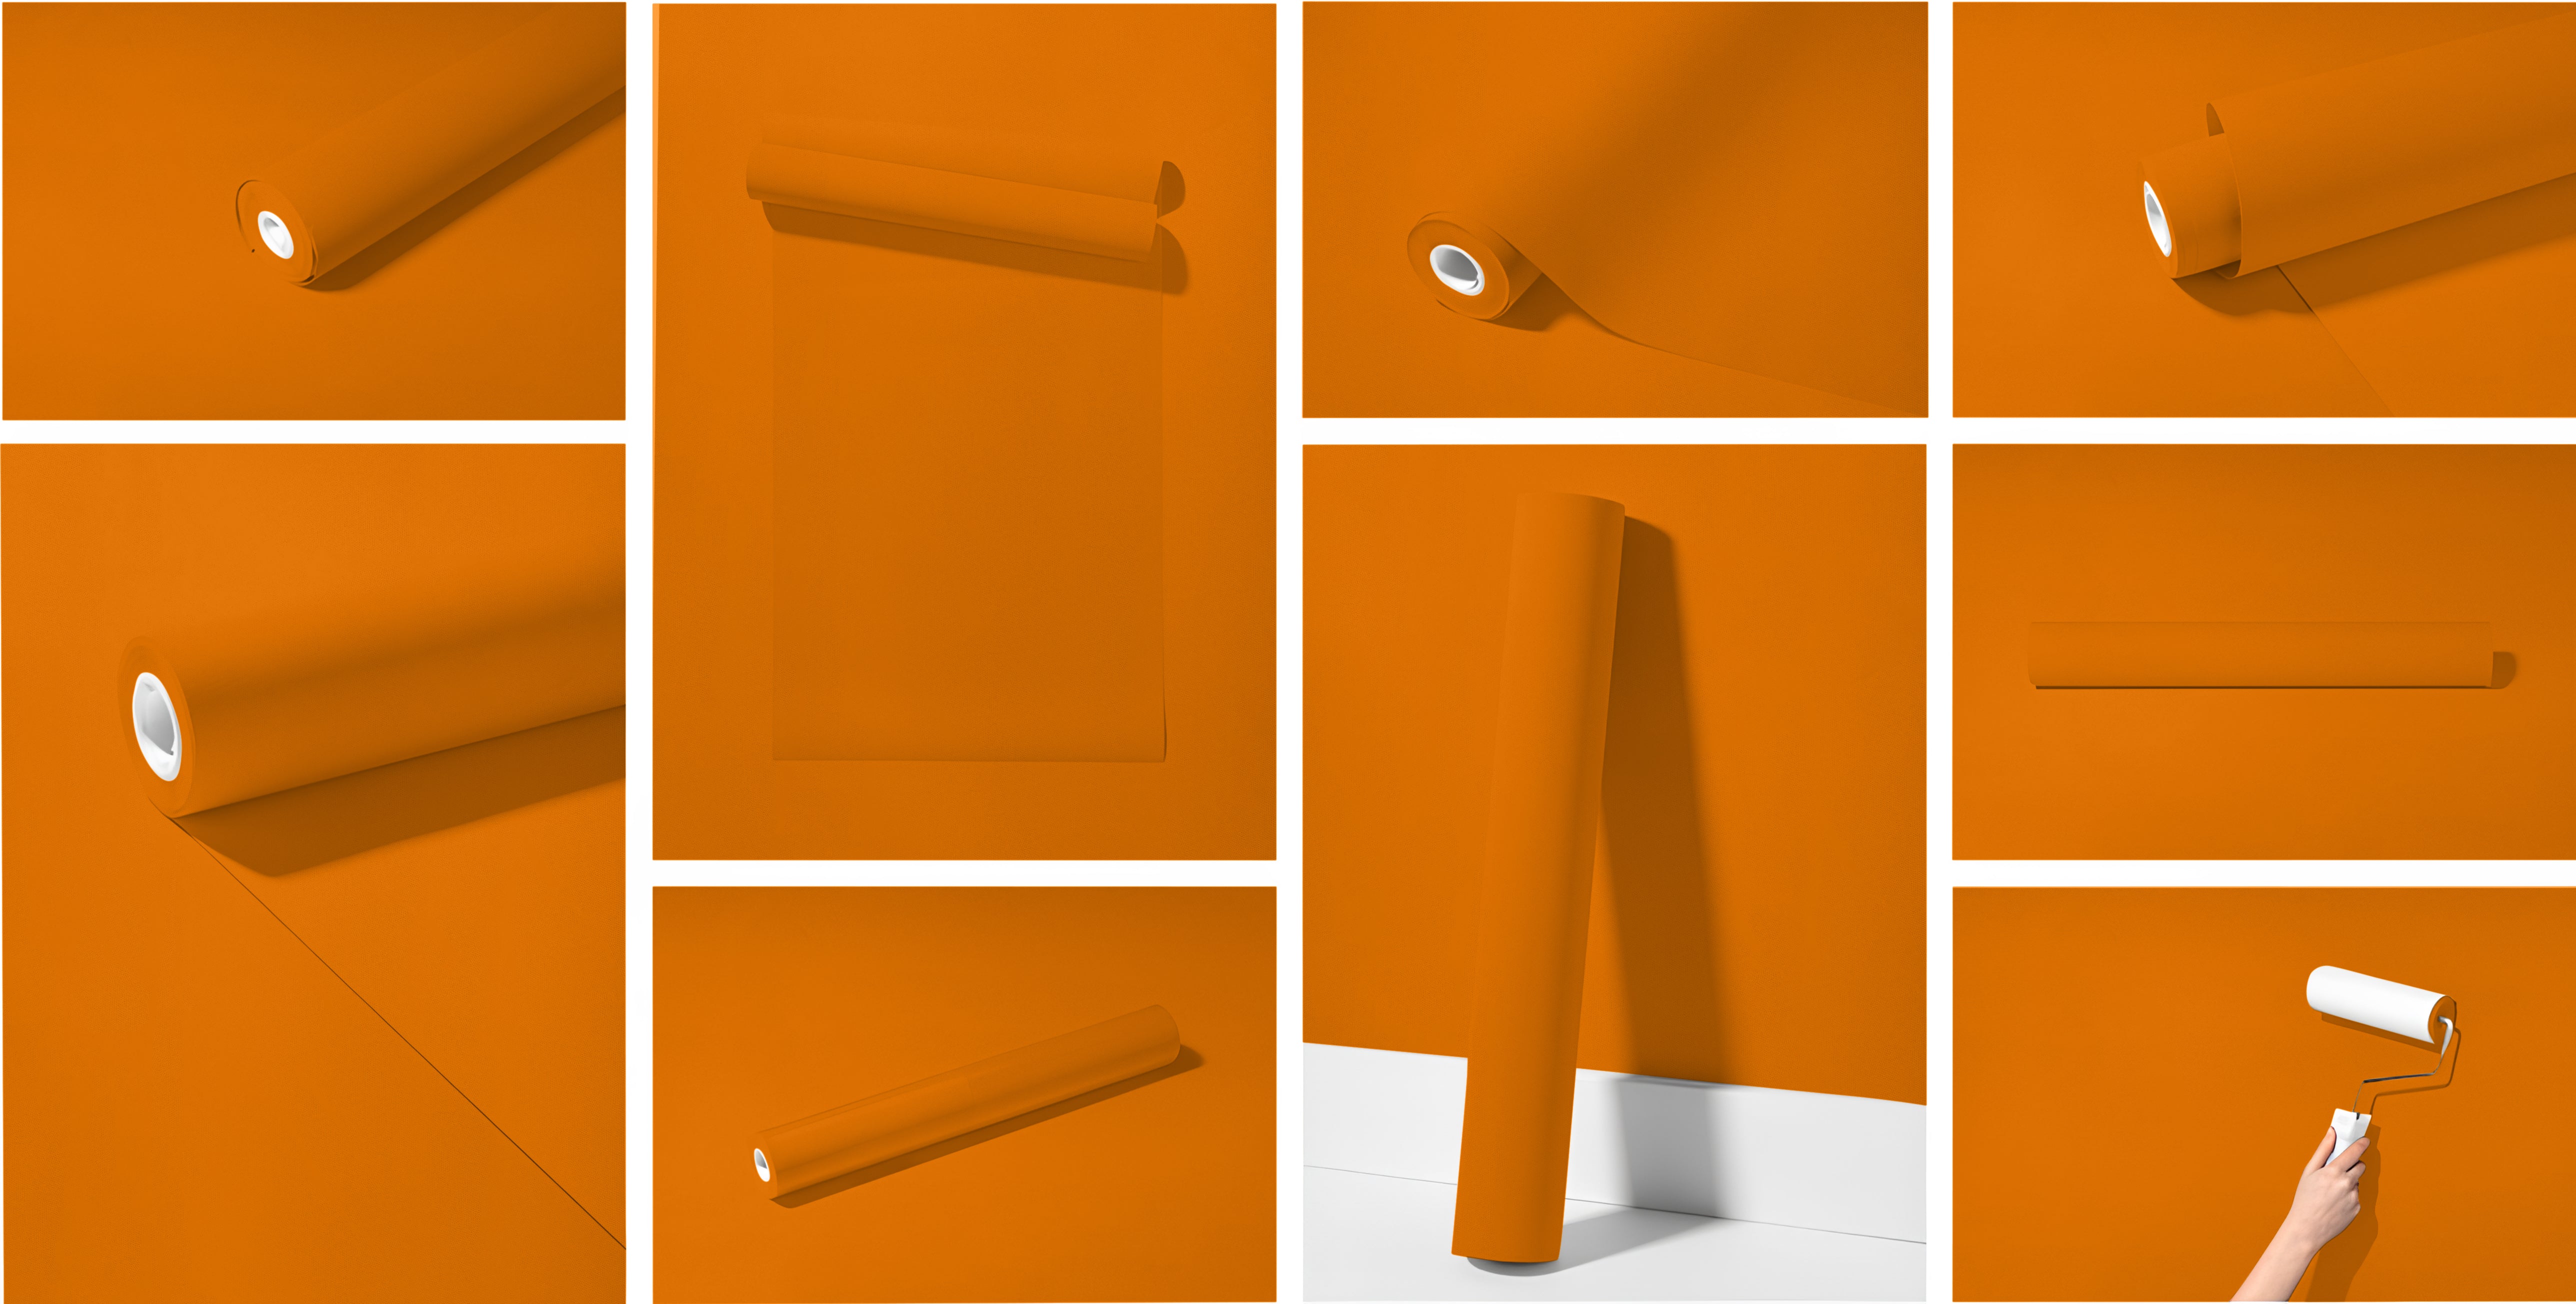 Peel & Stick Removable Re-usable Paint - Color RAL 2000 Yellow Orange - offRAL™ - RALRAW LLC, USA